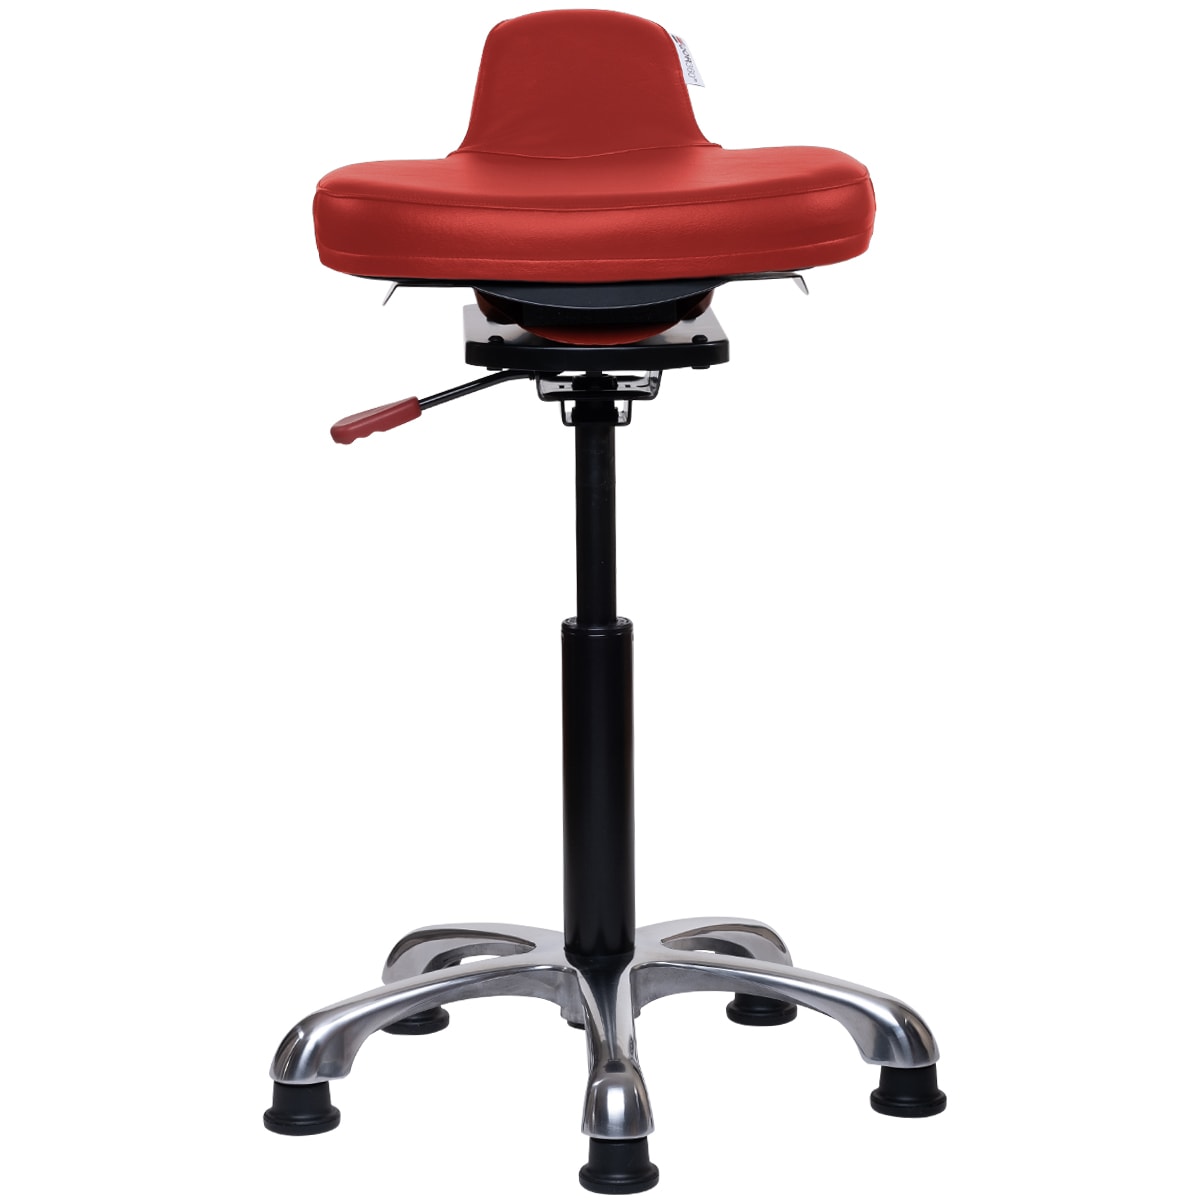 ariel 2.0 active chair pictured in red performance vegan leather